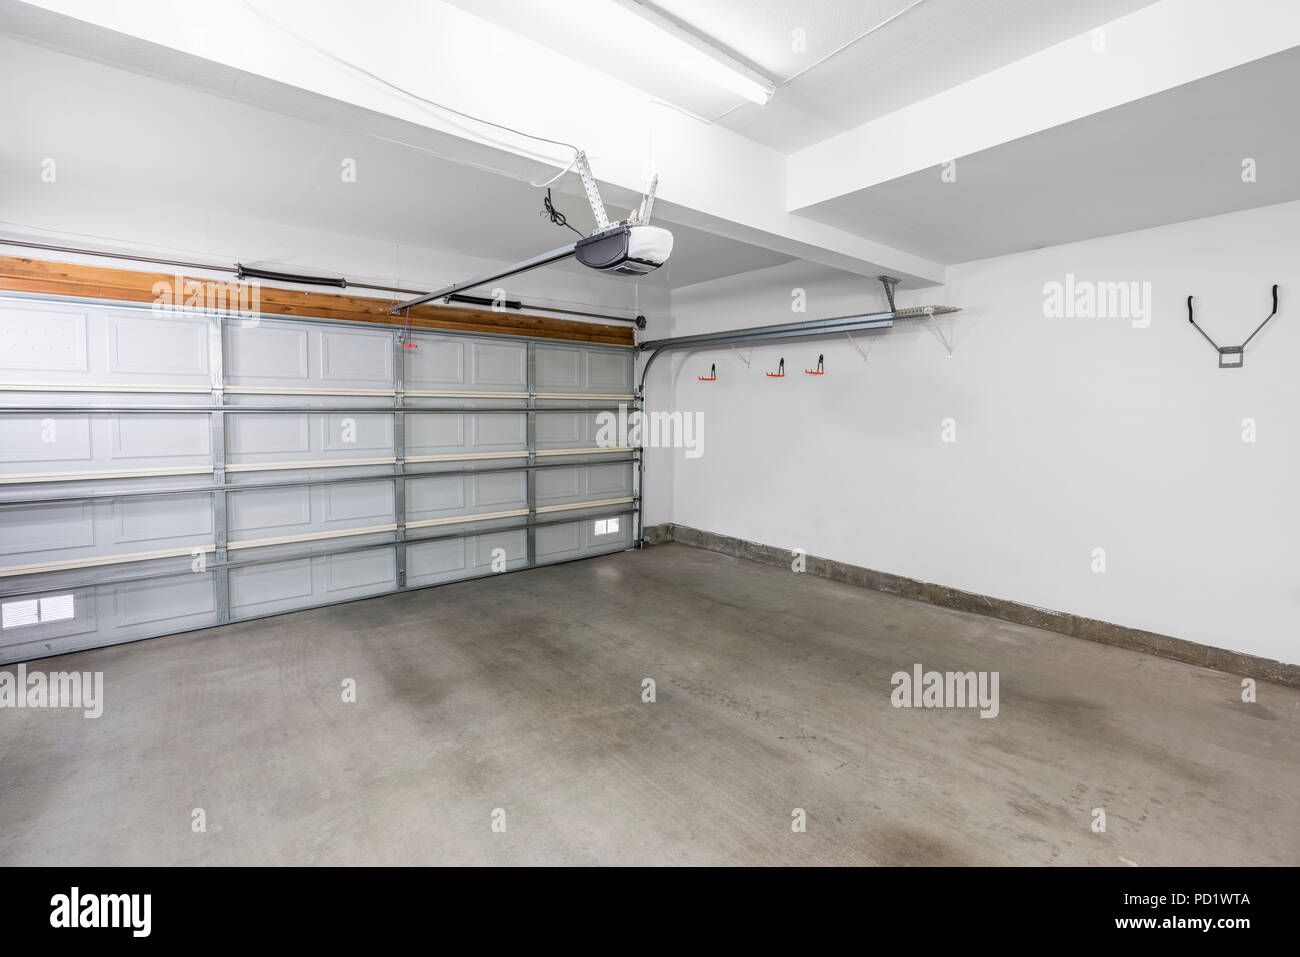 Empty residential garage in modern suburban home. Stock Photo